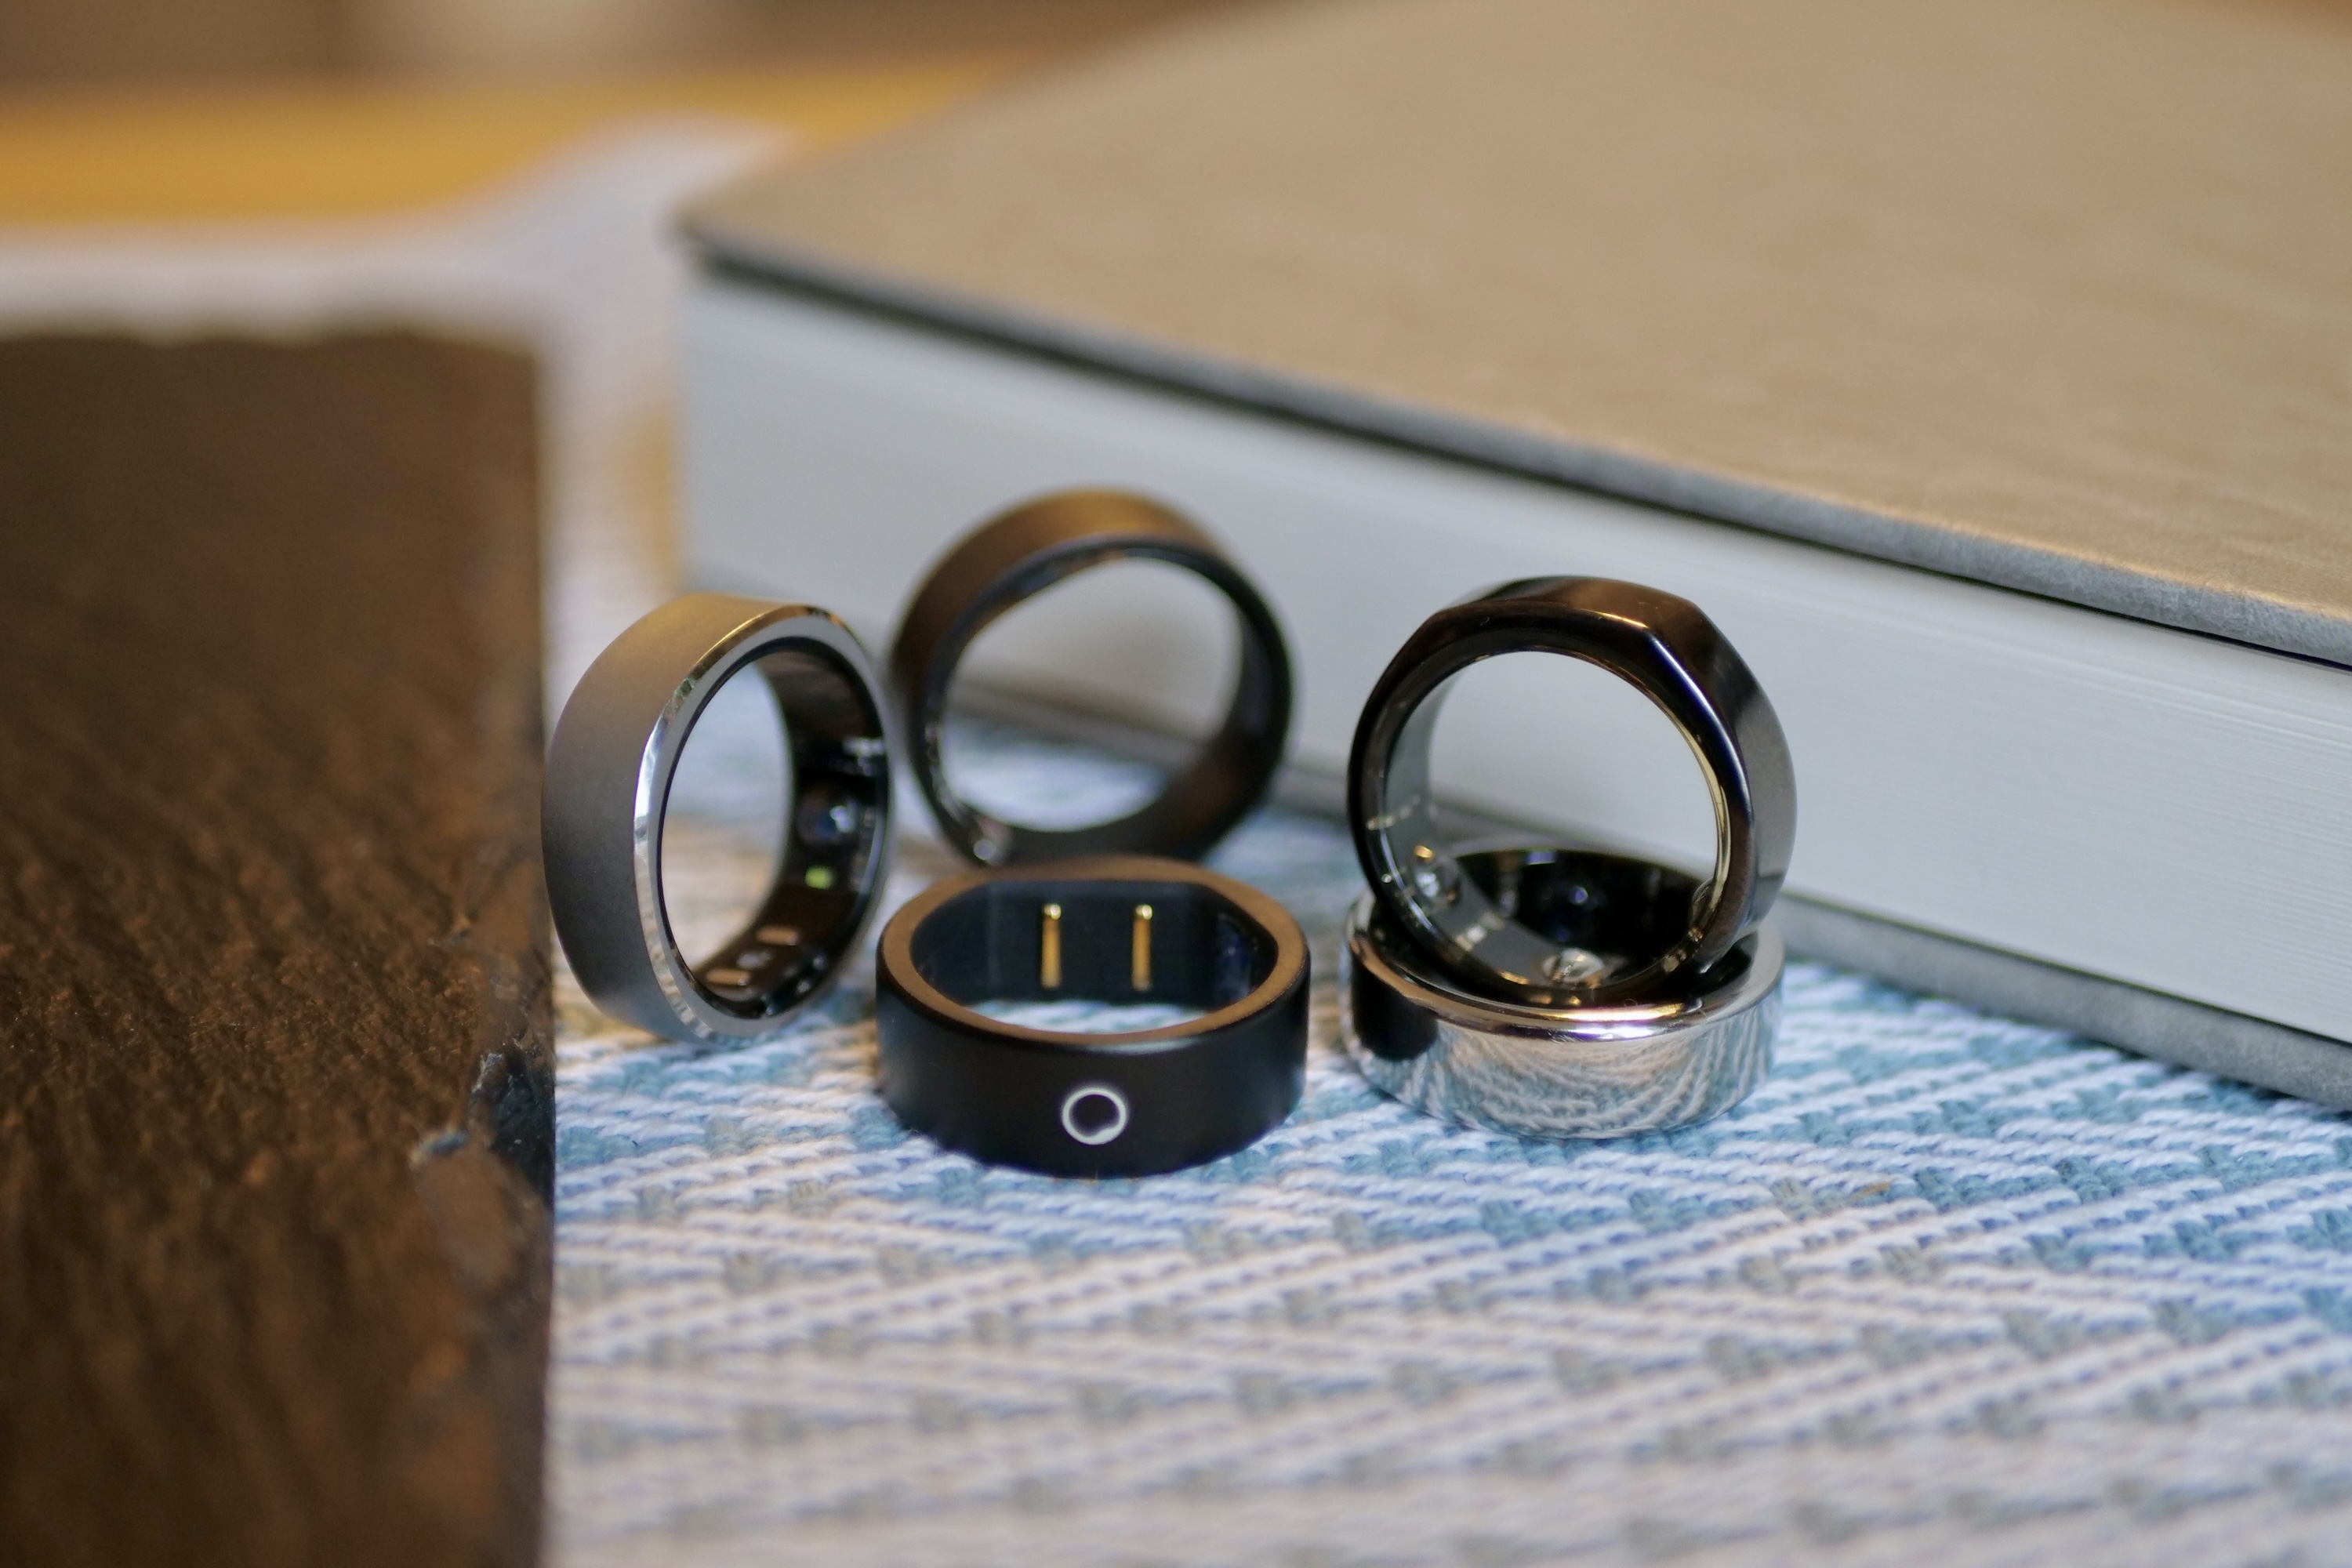 Helio smart ring designed to help support athletic performance